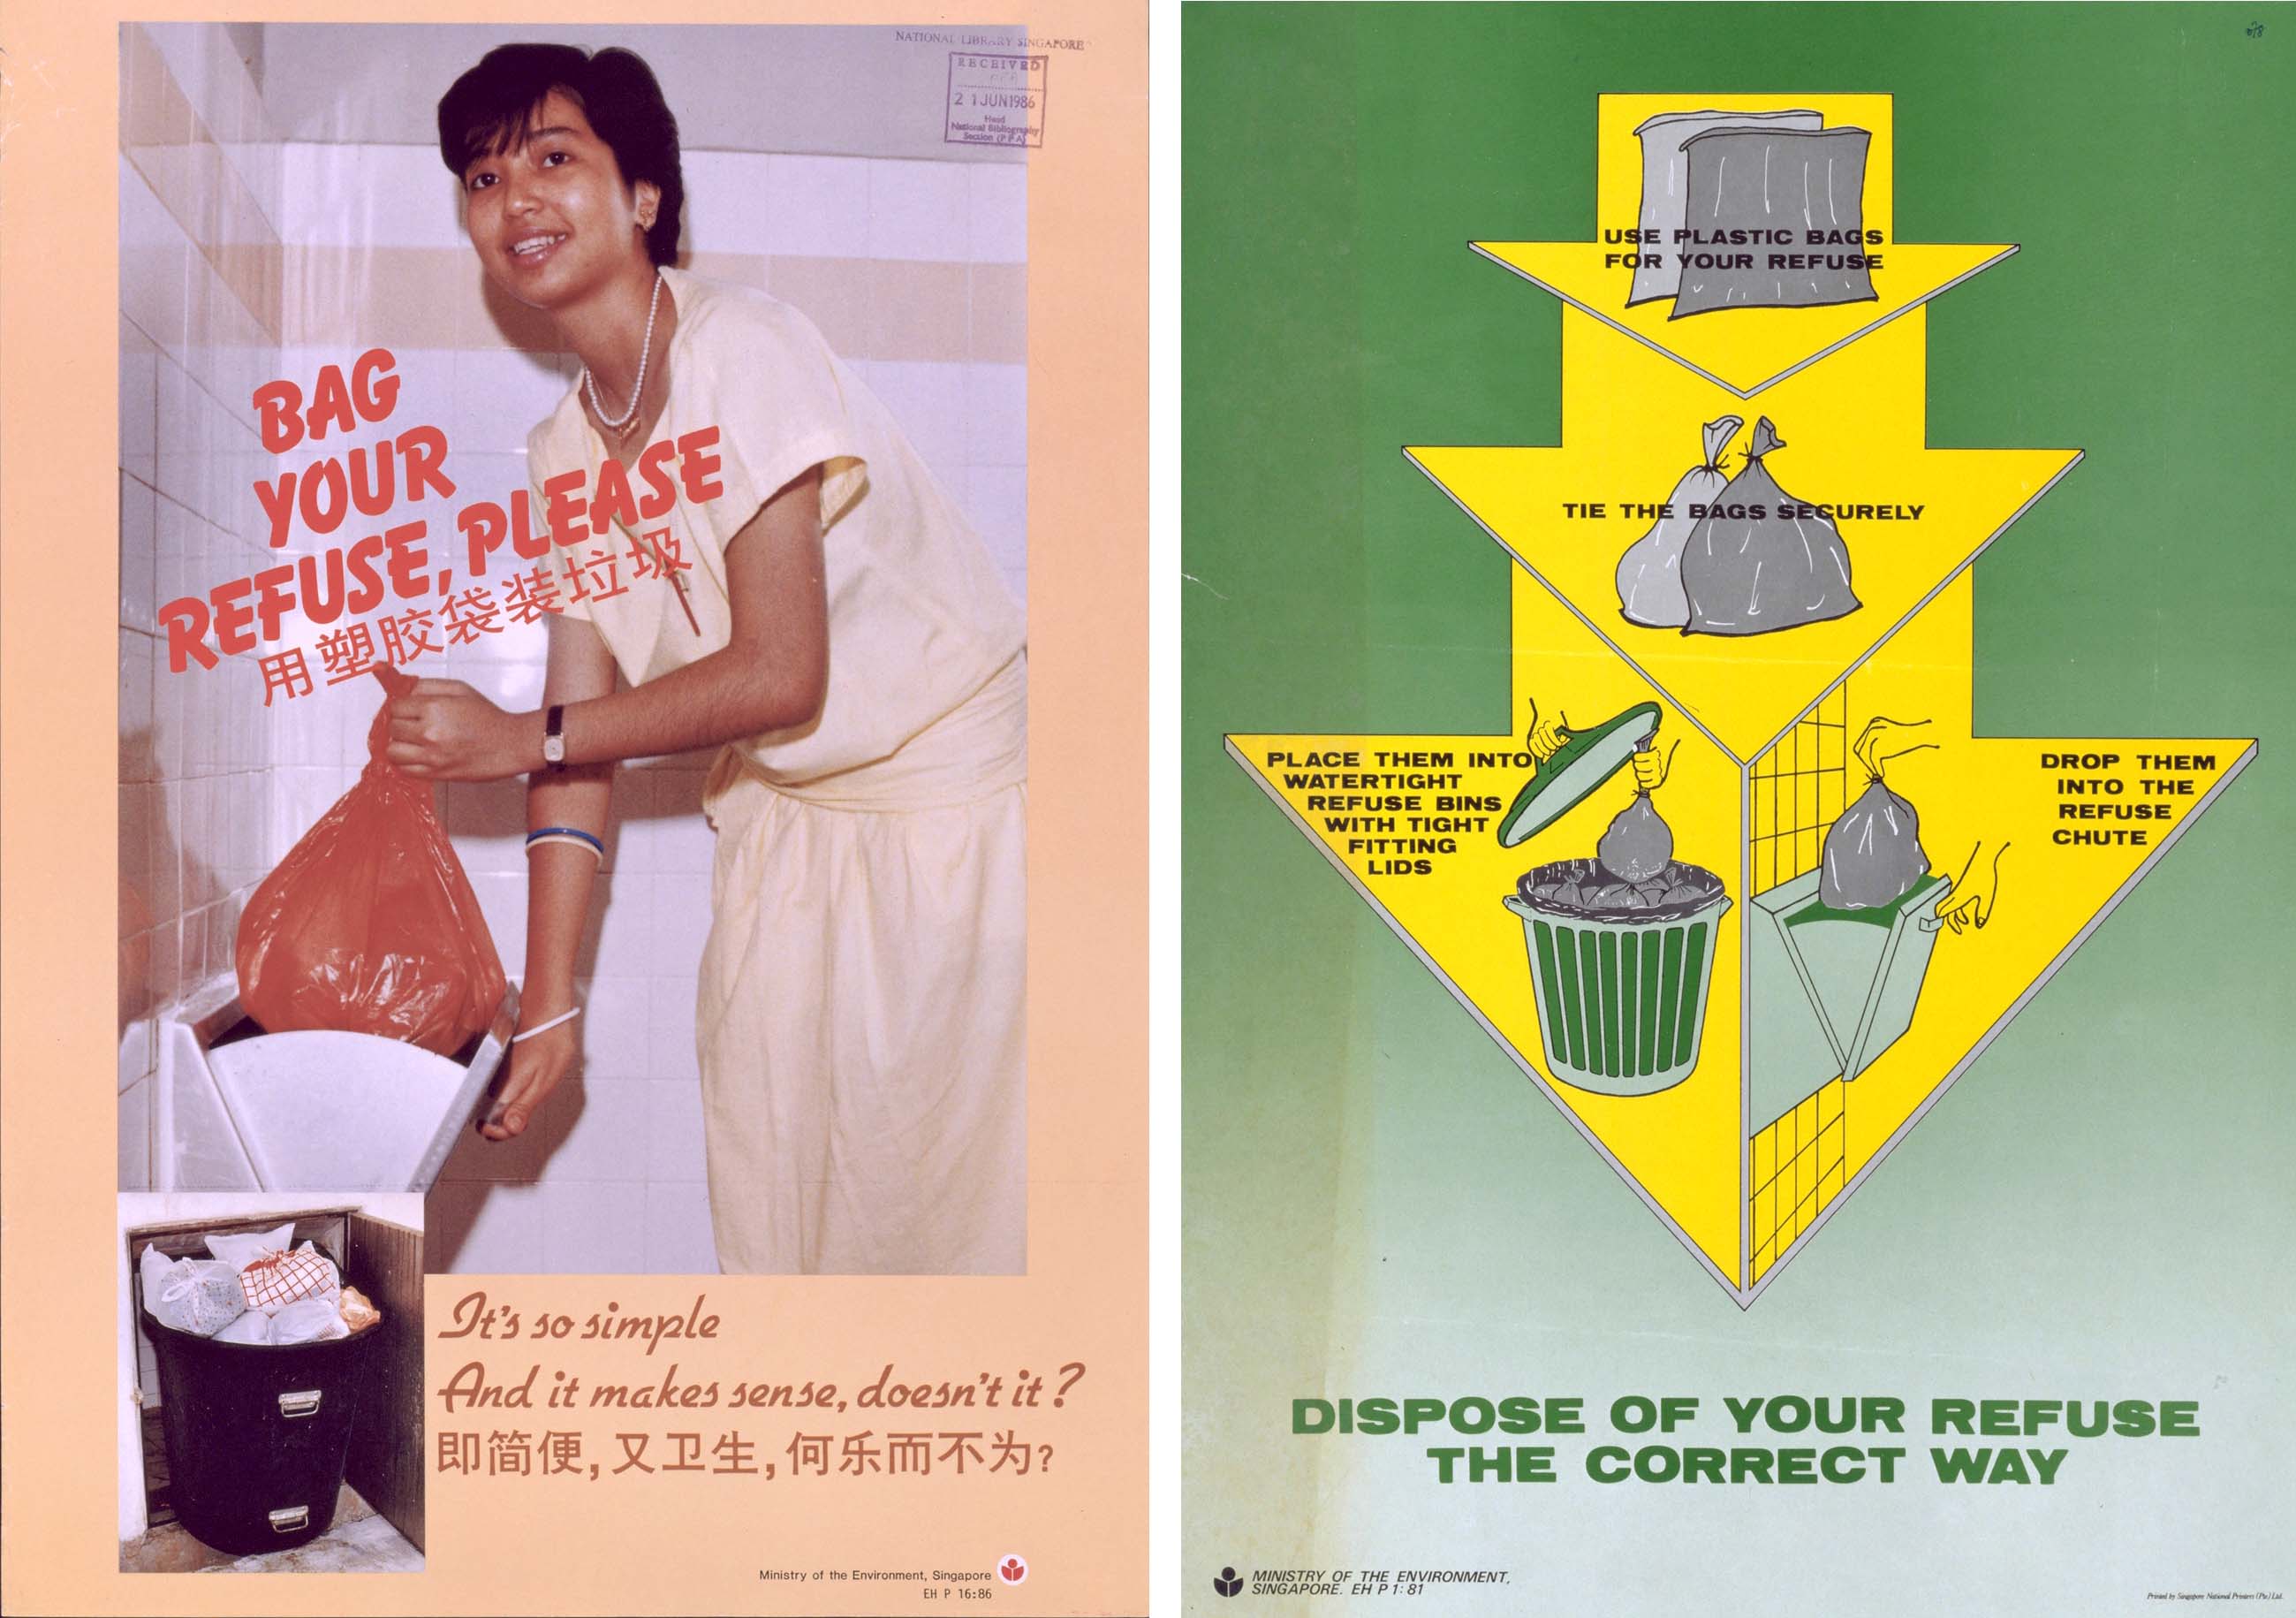 Posters from the educational programme run by the Ministry of Environment to encourage residents to bag their waste